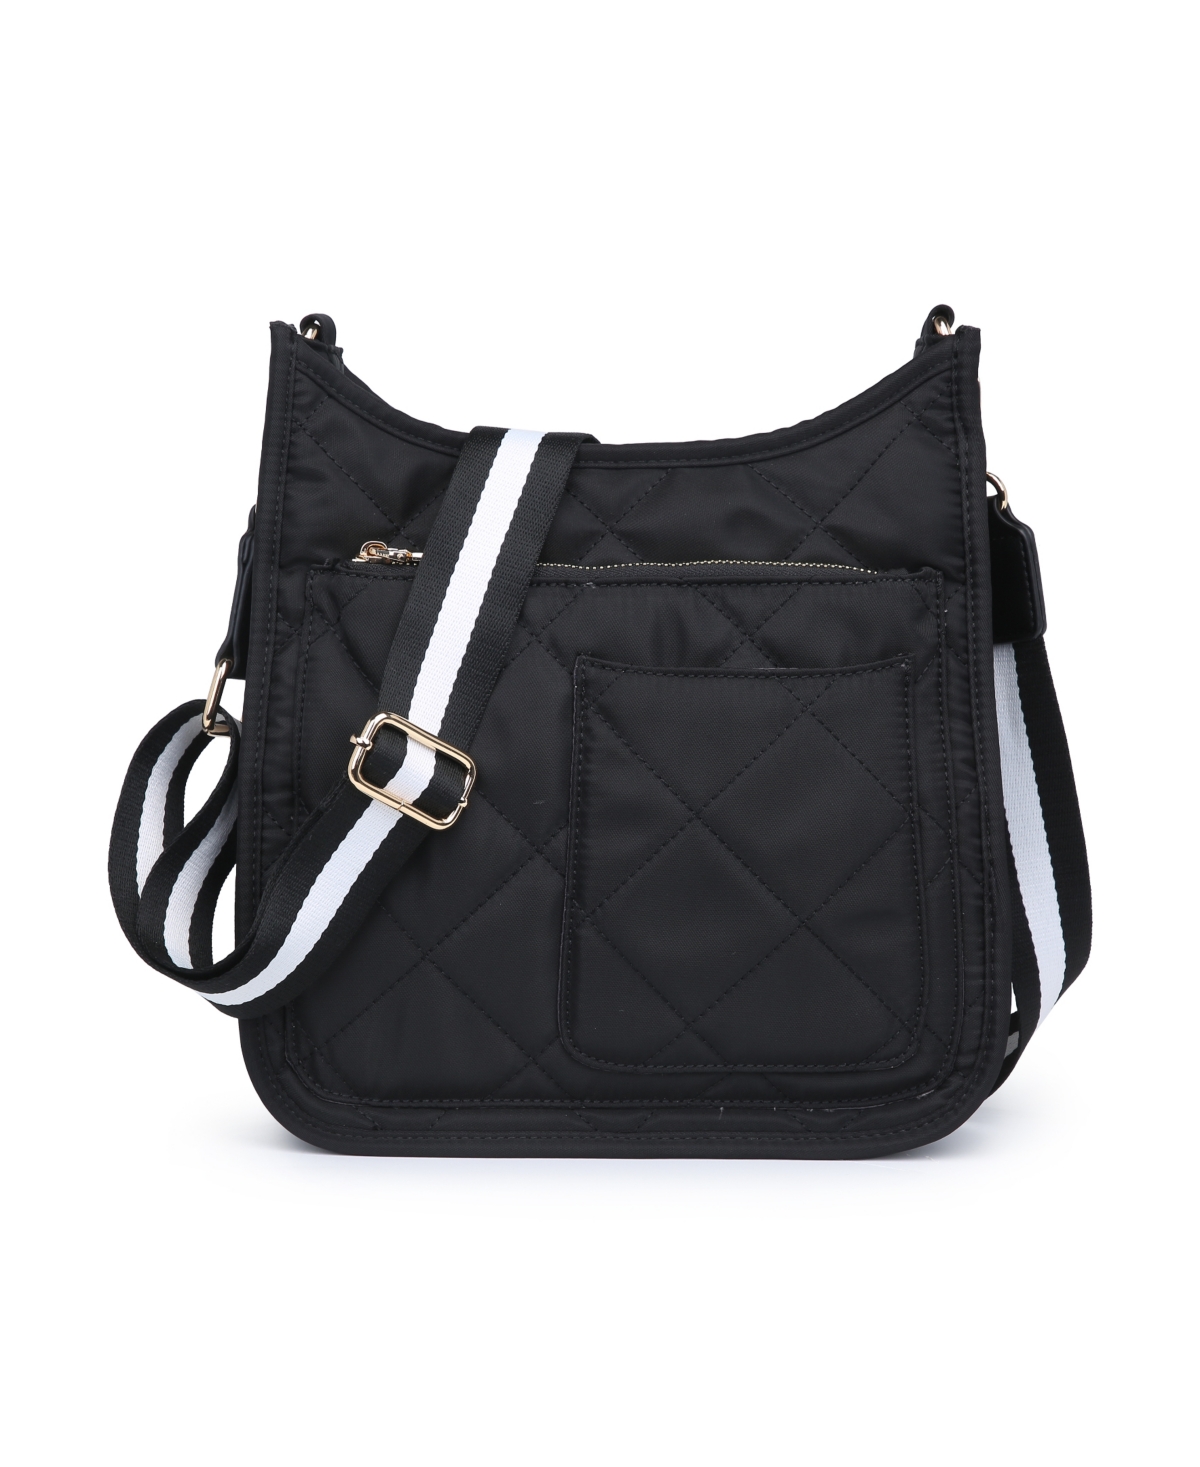 Women's Motivator Quilted Crossbody Bags - Black